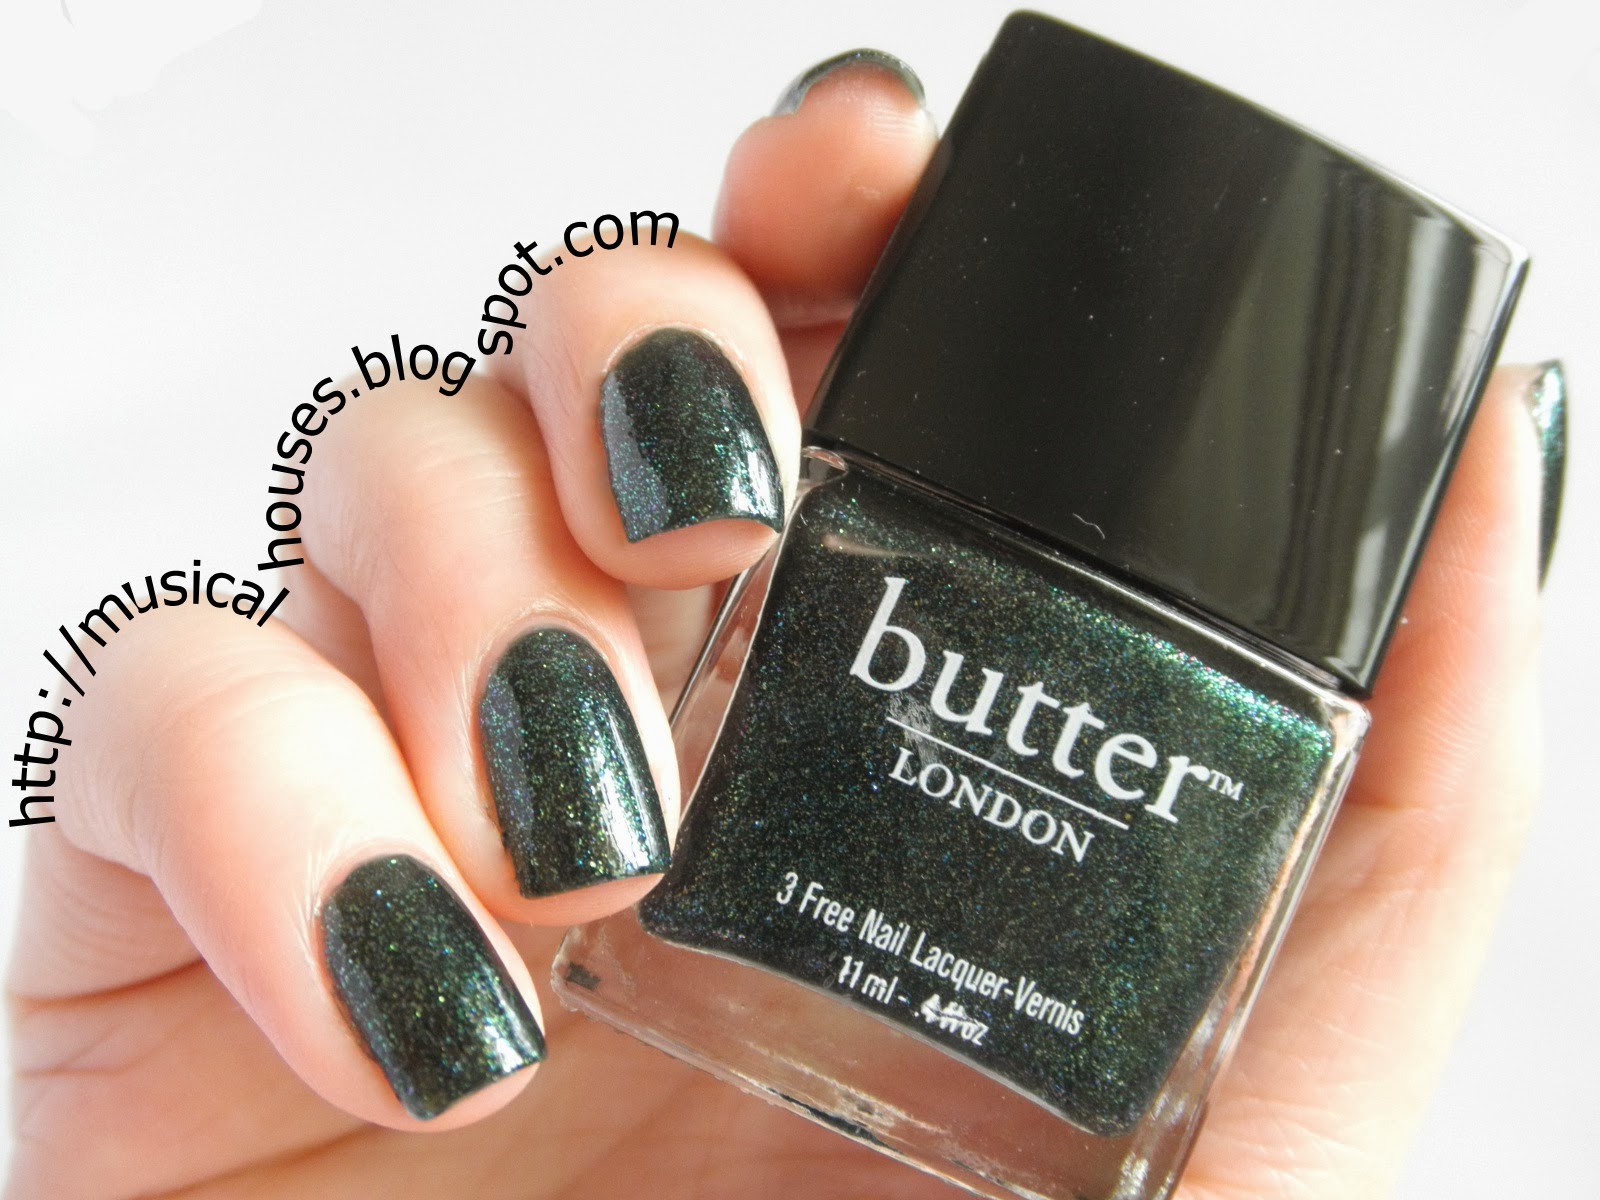 7. Butter London Patent Shine 10X Nail Lacquer in "Fruit Machine" - wide 5